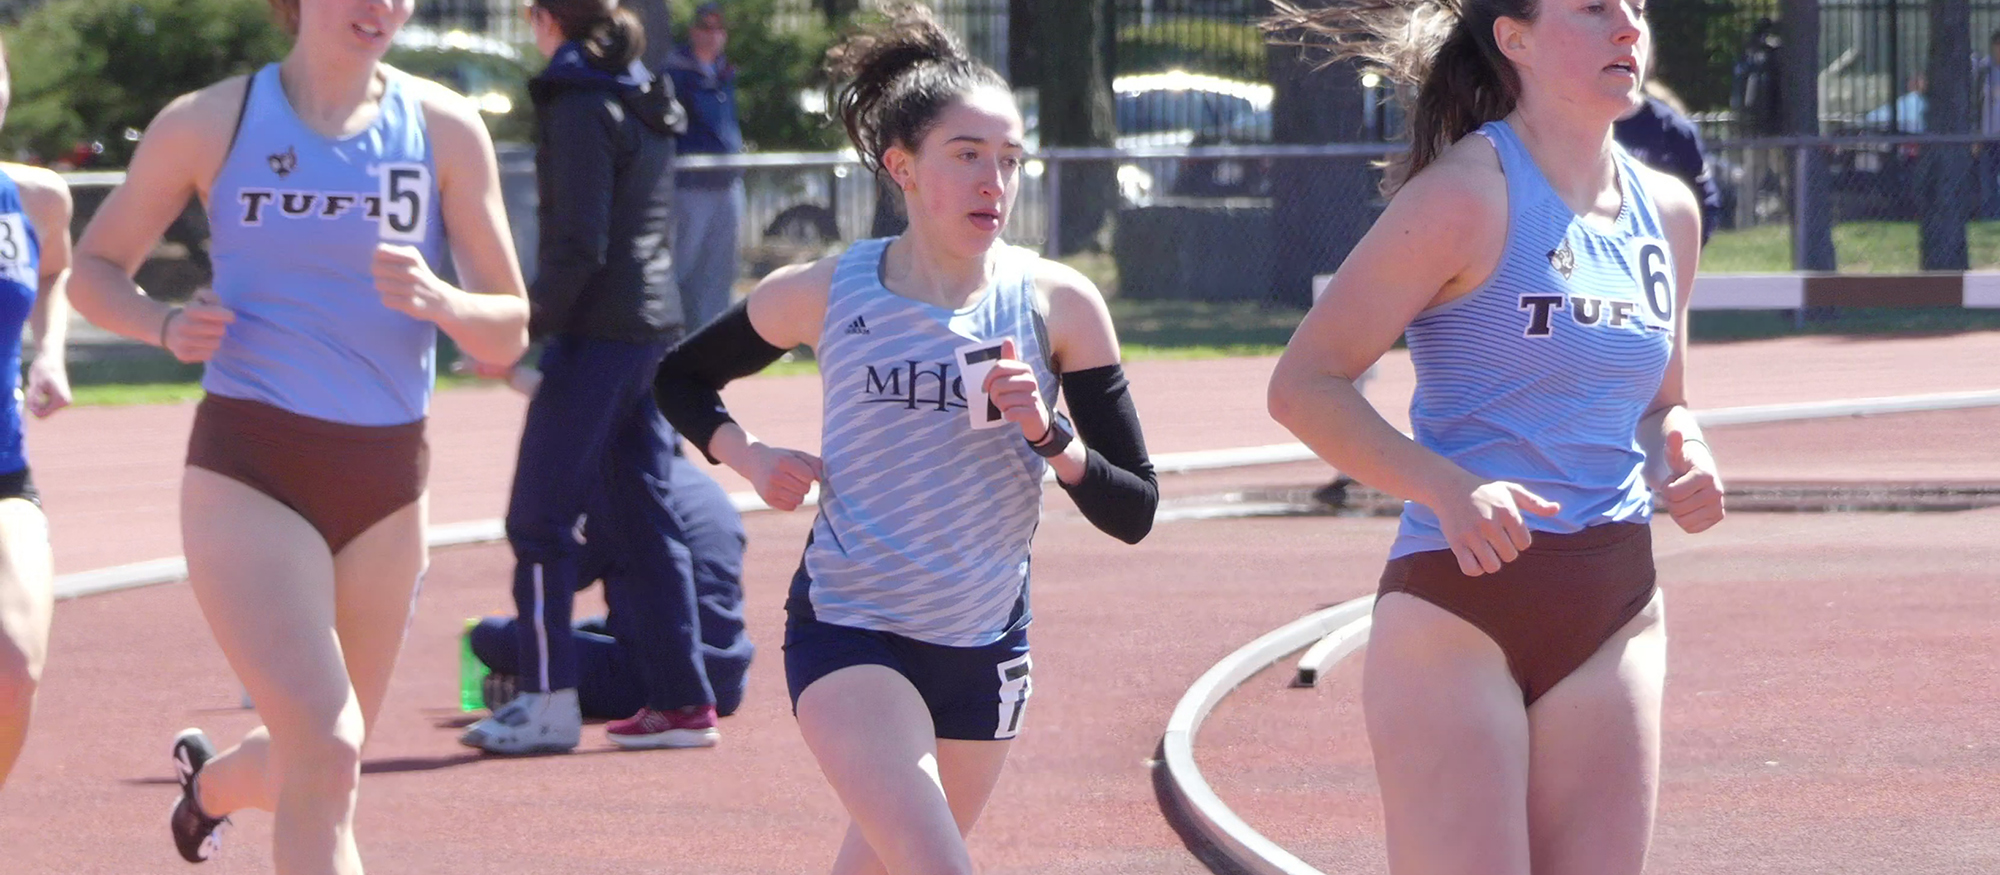 Track and Field's Selkin Breaks 5k Record at Tufts Snowflake Classic